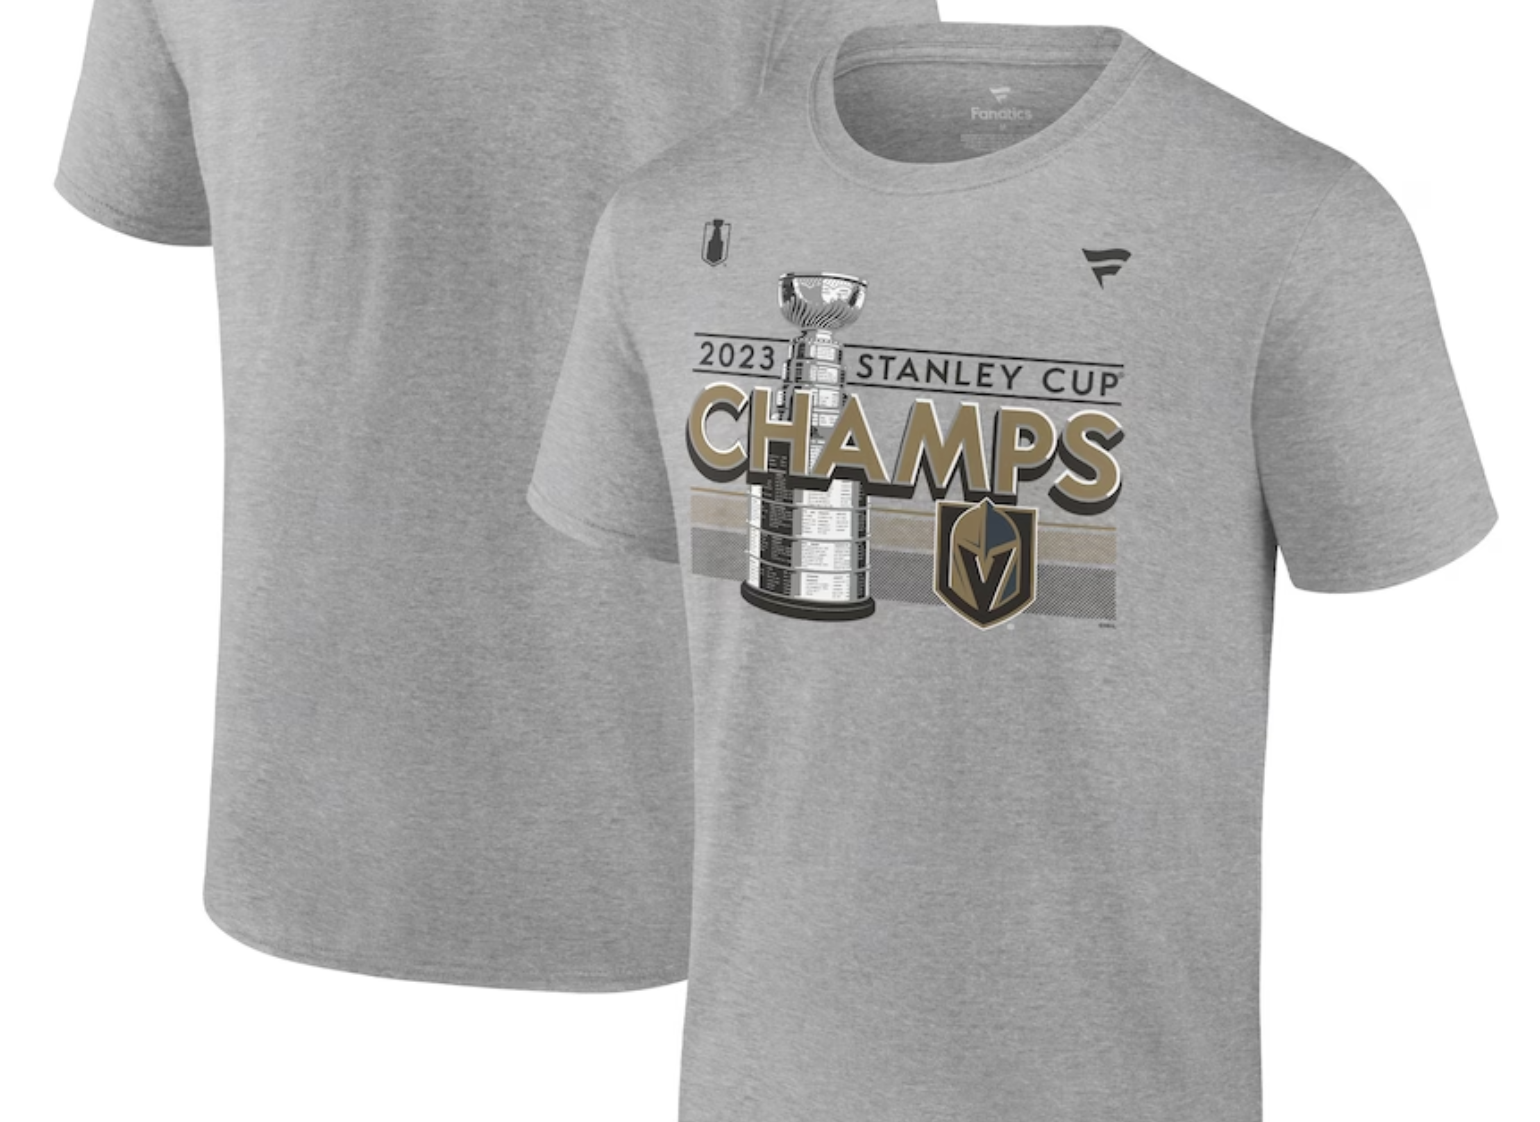 NHL Boston Bruins 2019 Stanley Cup Champions Women's Shirt Size XL NEW WITH  TAG